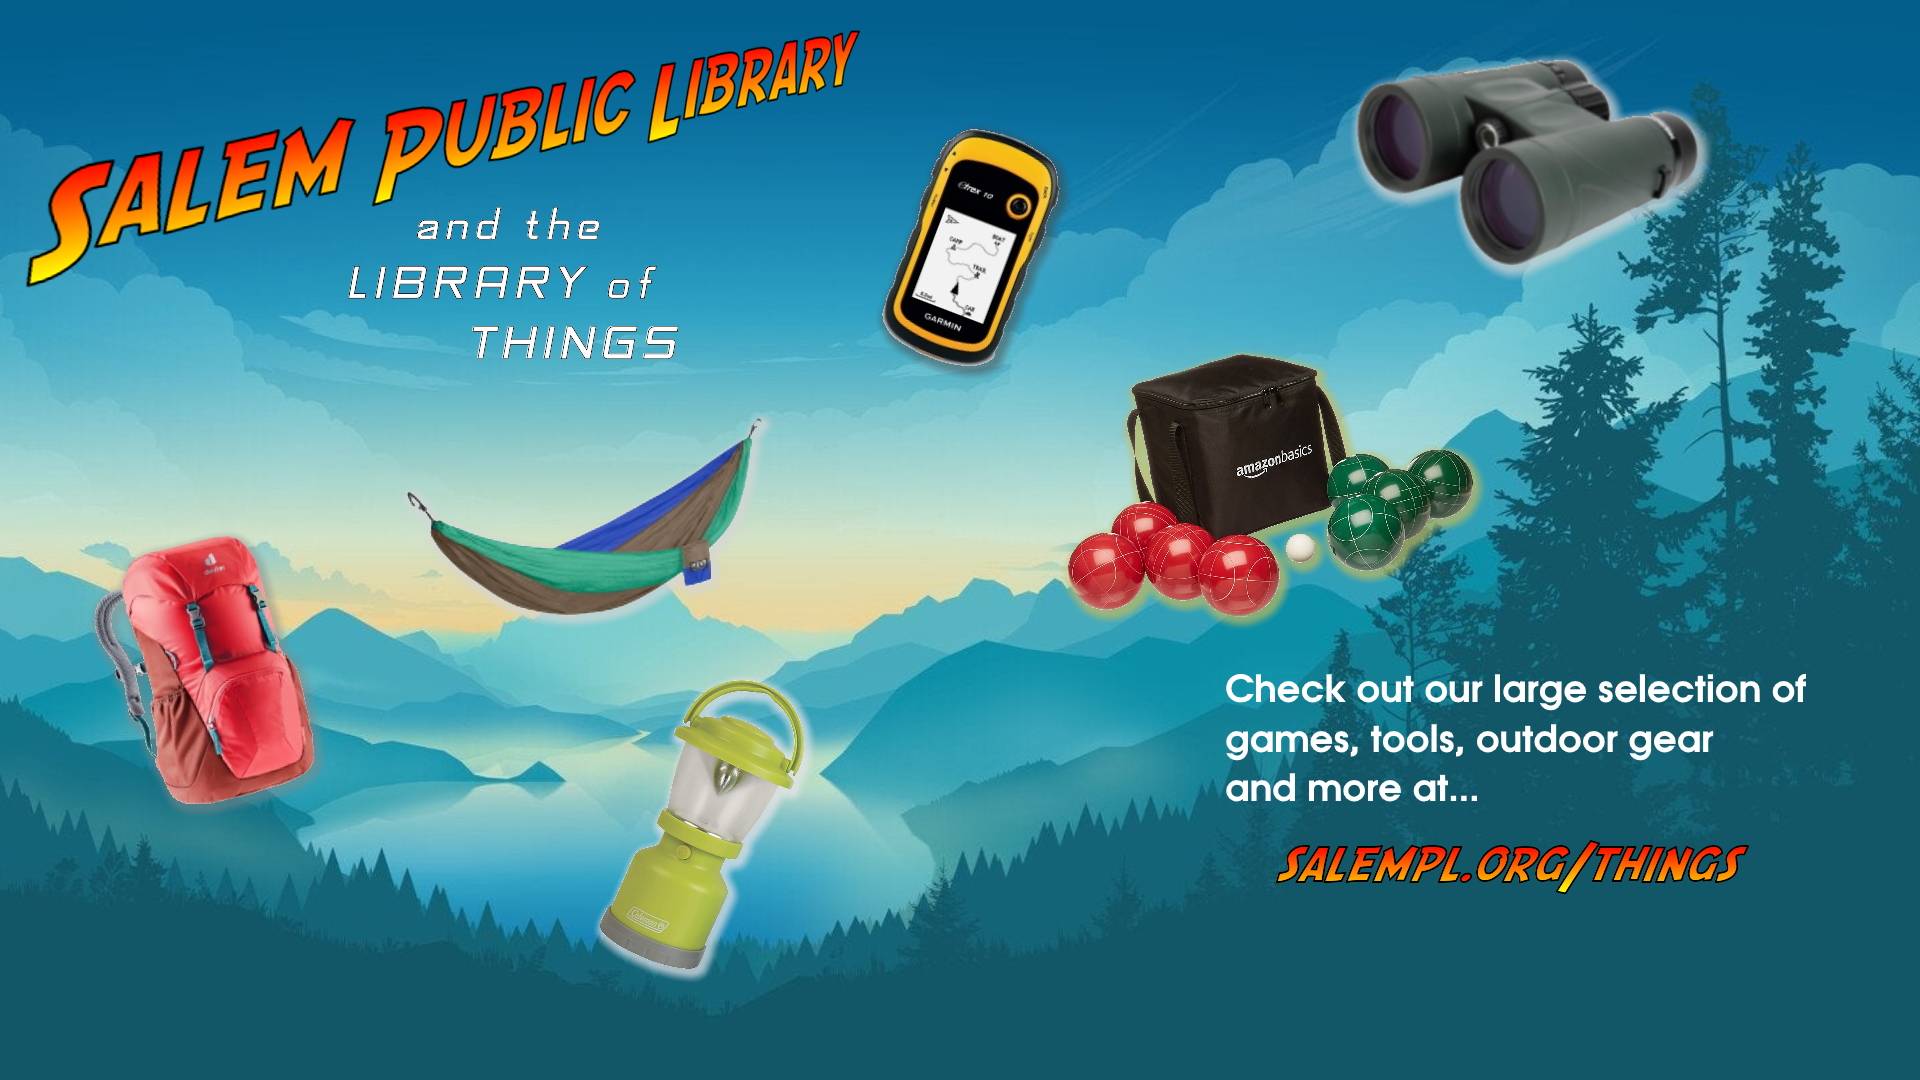 Library Of Things image